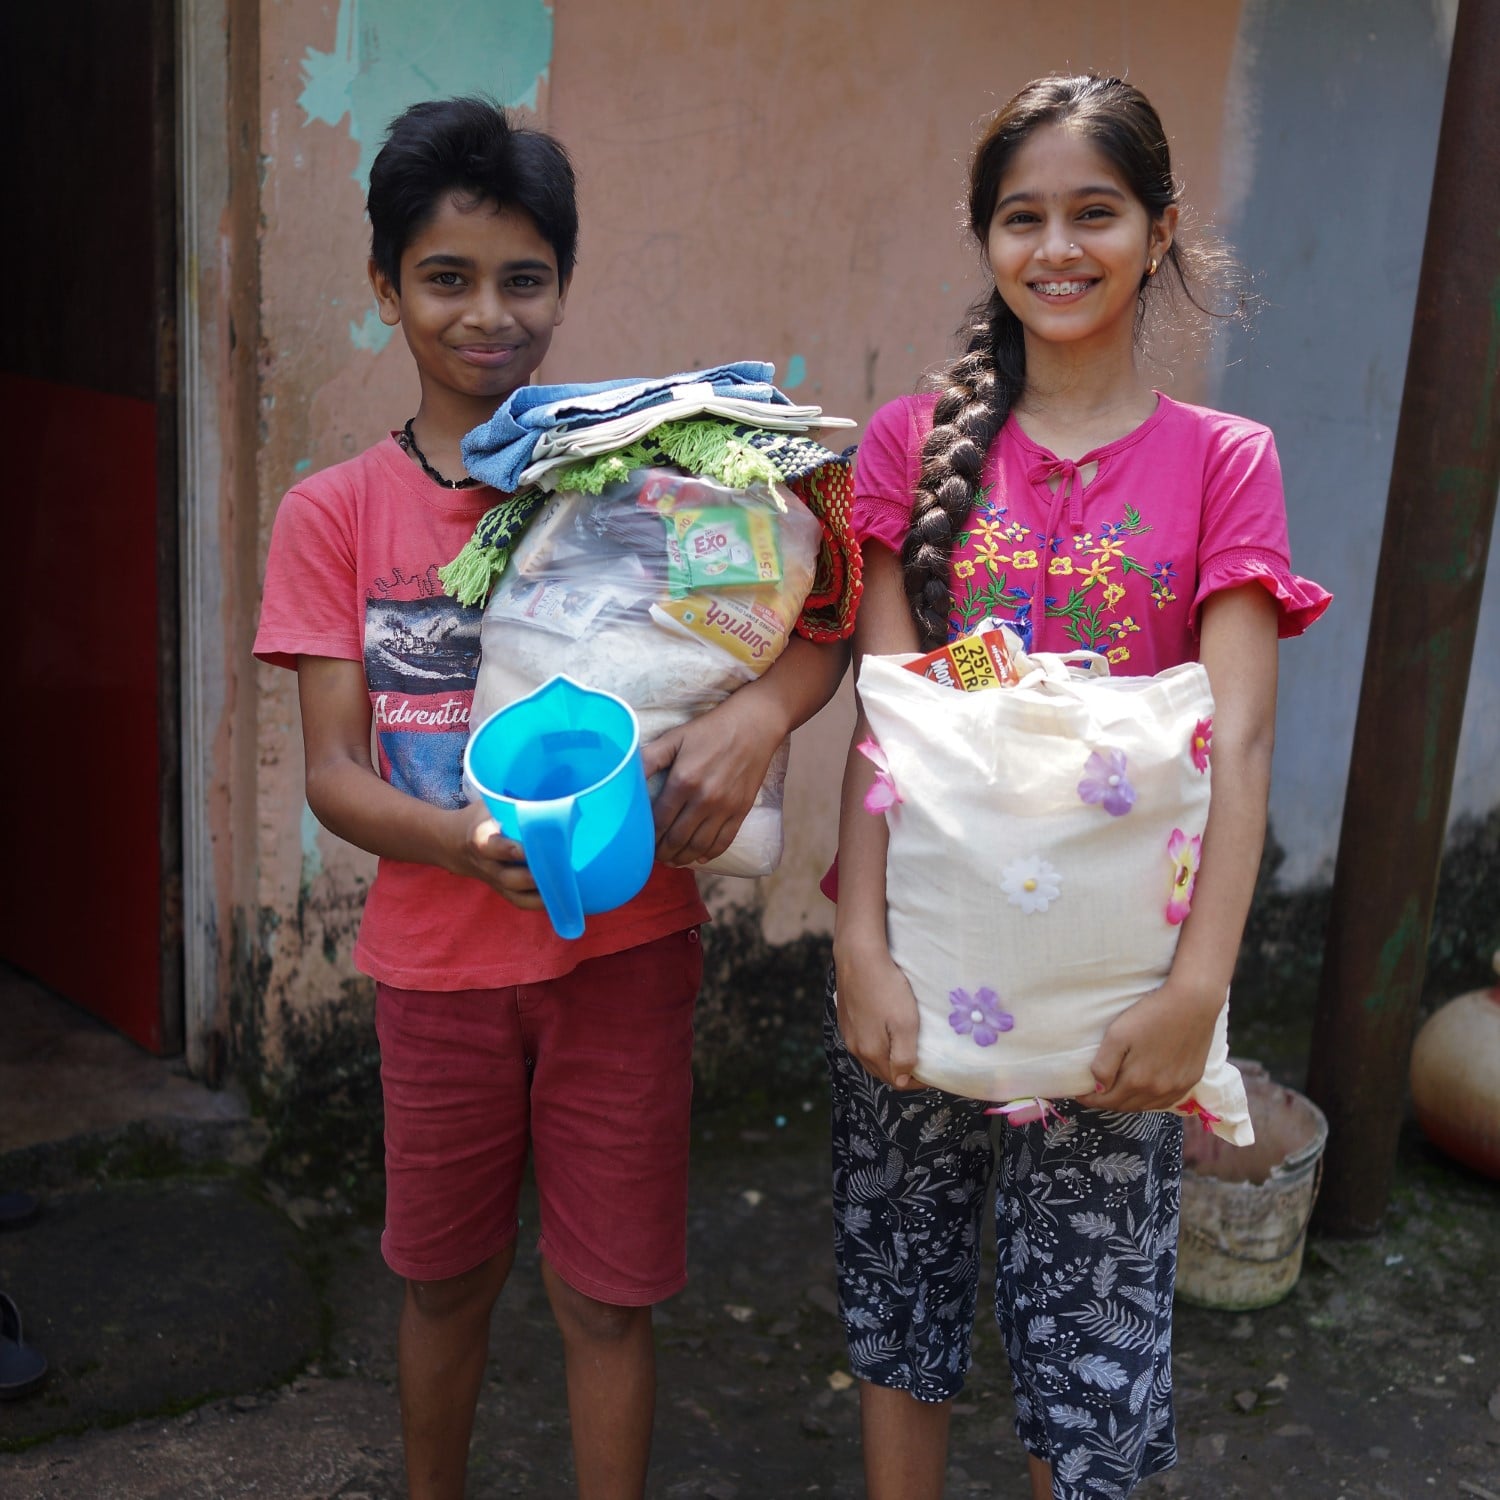 Diwali Gifts being distributed2021/11-Diwali-Gifts-Mother.jpg|Holding Diwali Gifts2021/11-All-Diwali-Bags.jpg|Lots of bags ready to be given out